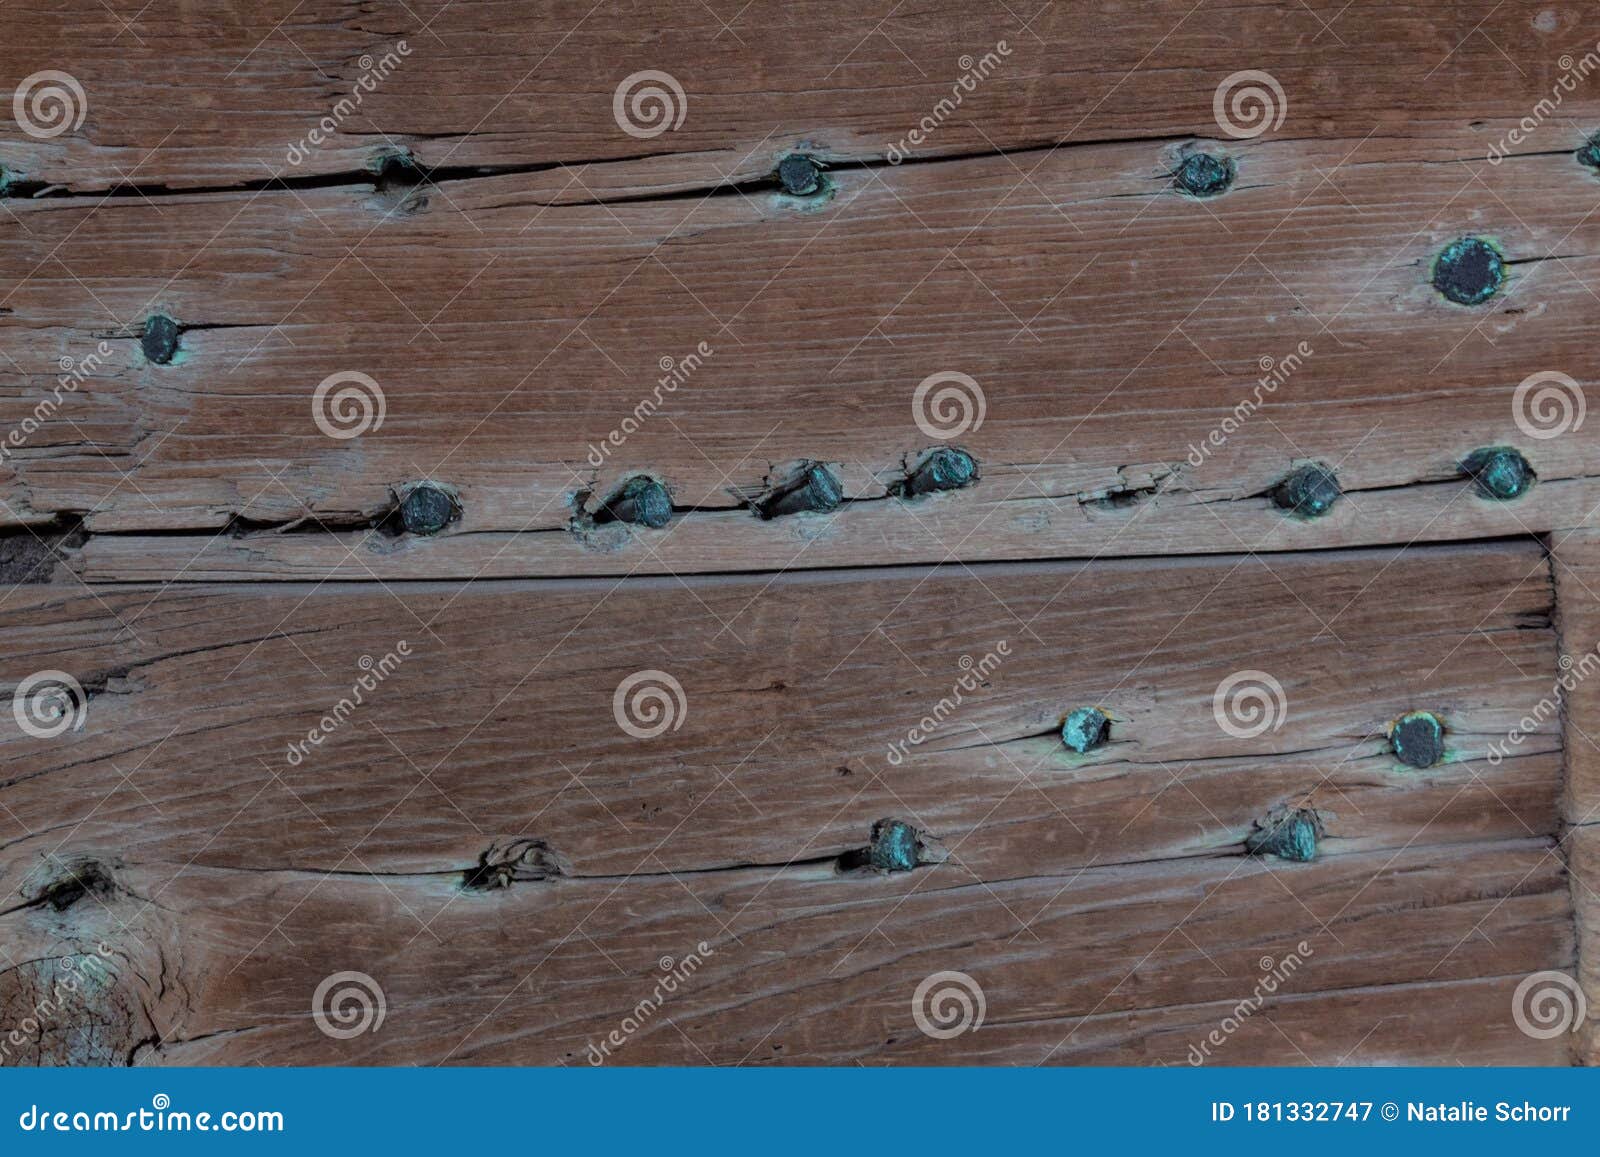 old wood planks nailed with hand made nails, verdigris patina, creative copy space background craftsmanship